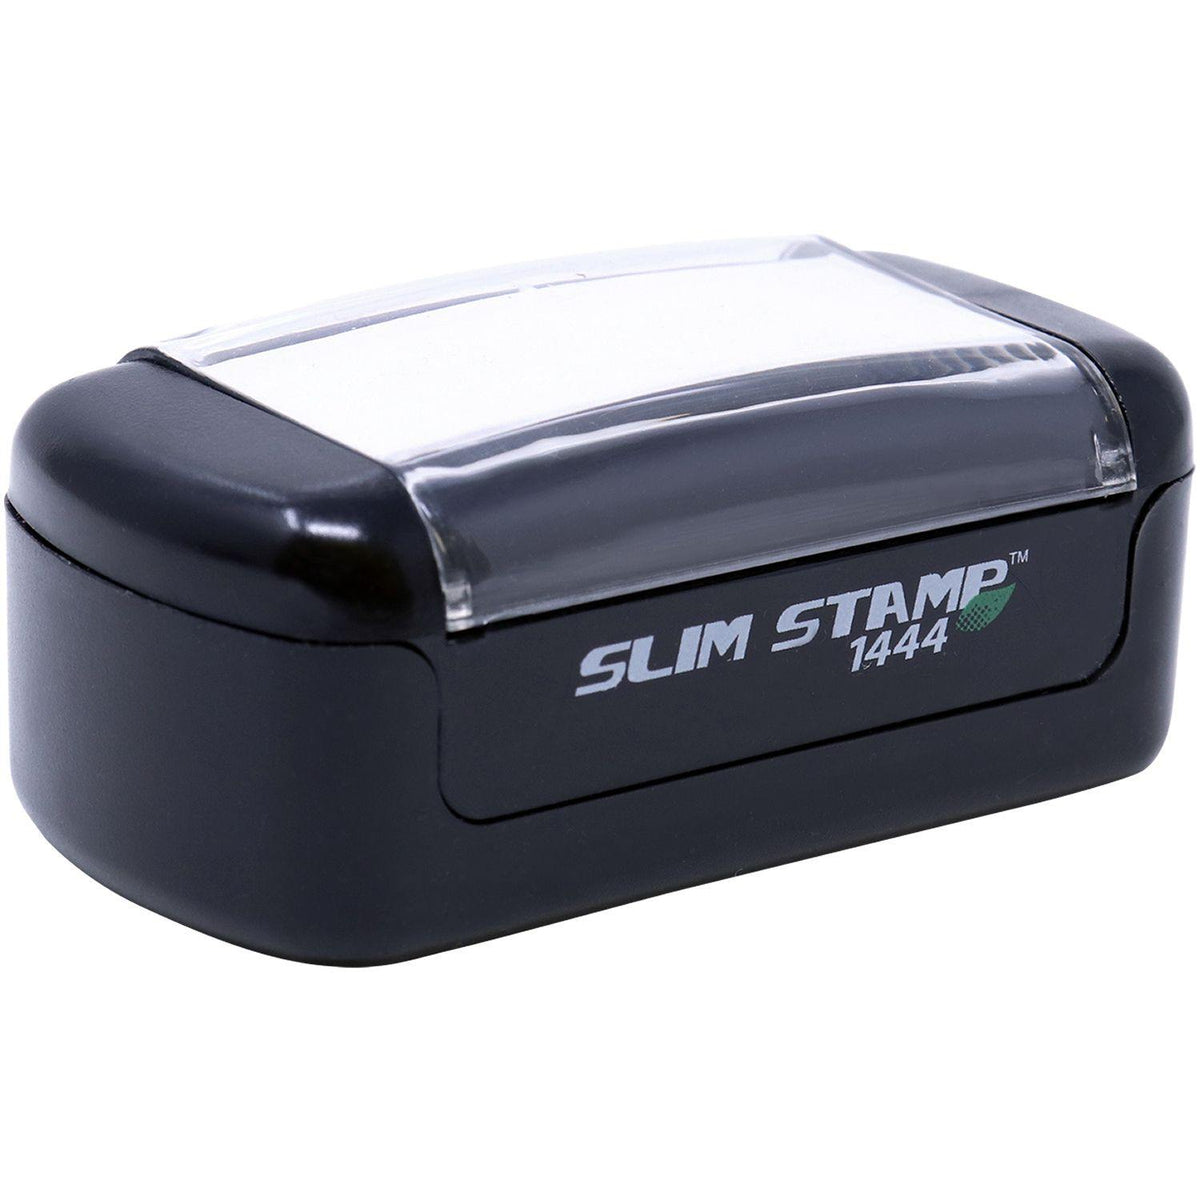 Alt View of Slim Pre Inked Copy For Your Information Stamp Mount Angle